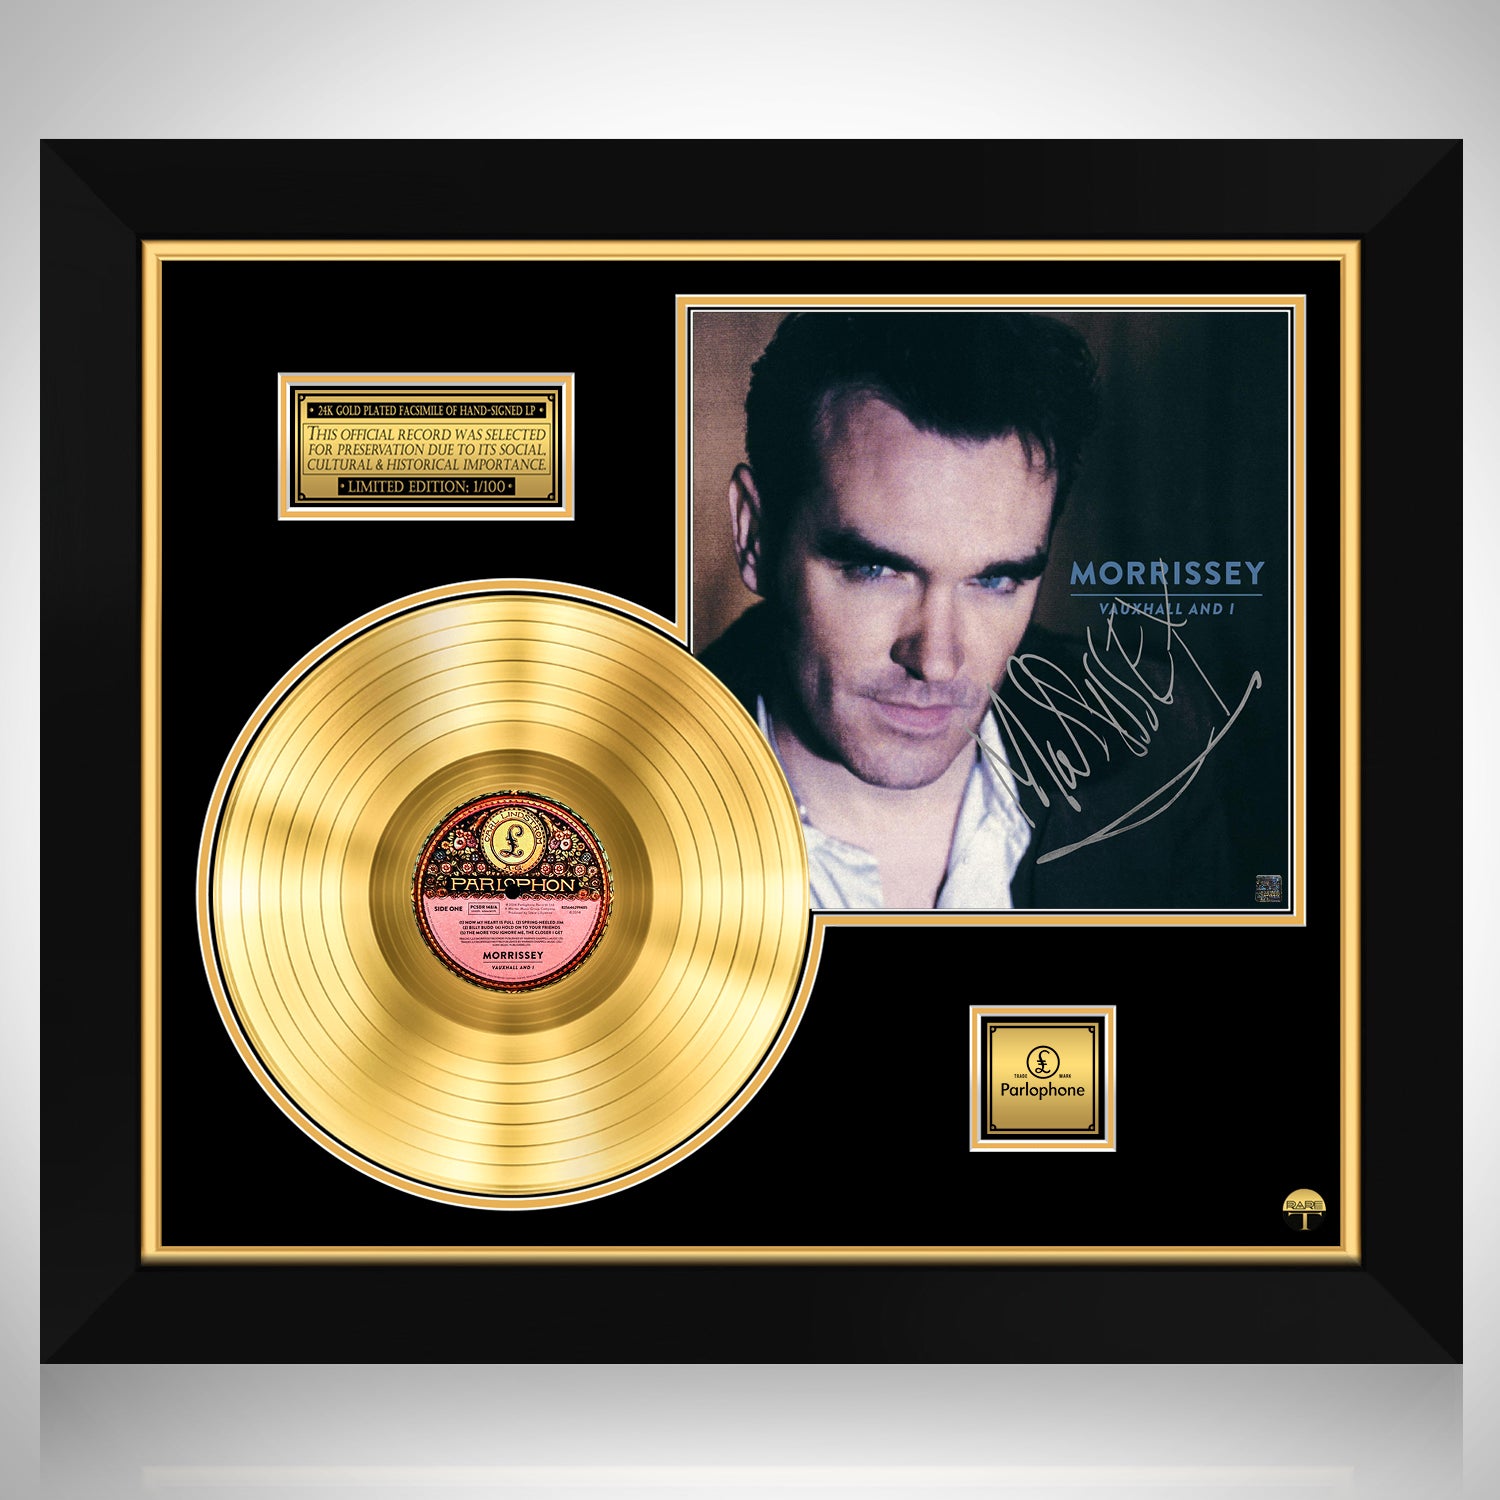 Morrissey Vauxhall and I Gold LP Limited Signature Edition Custom 